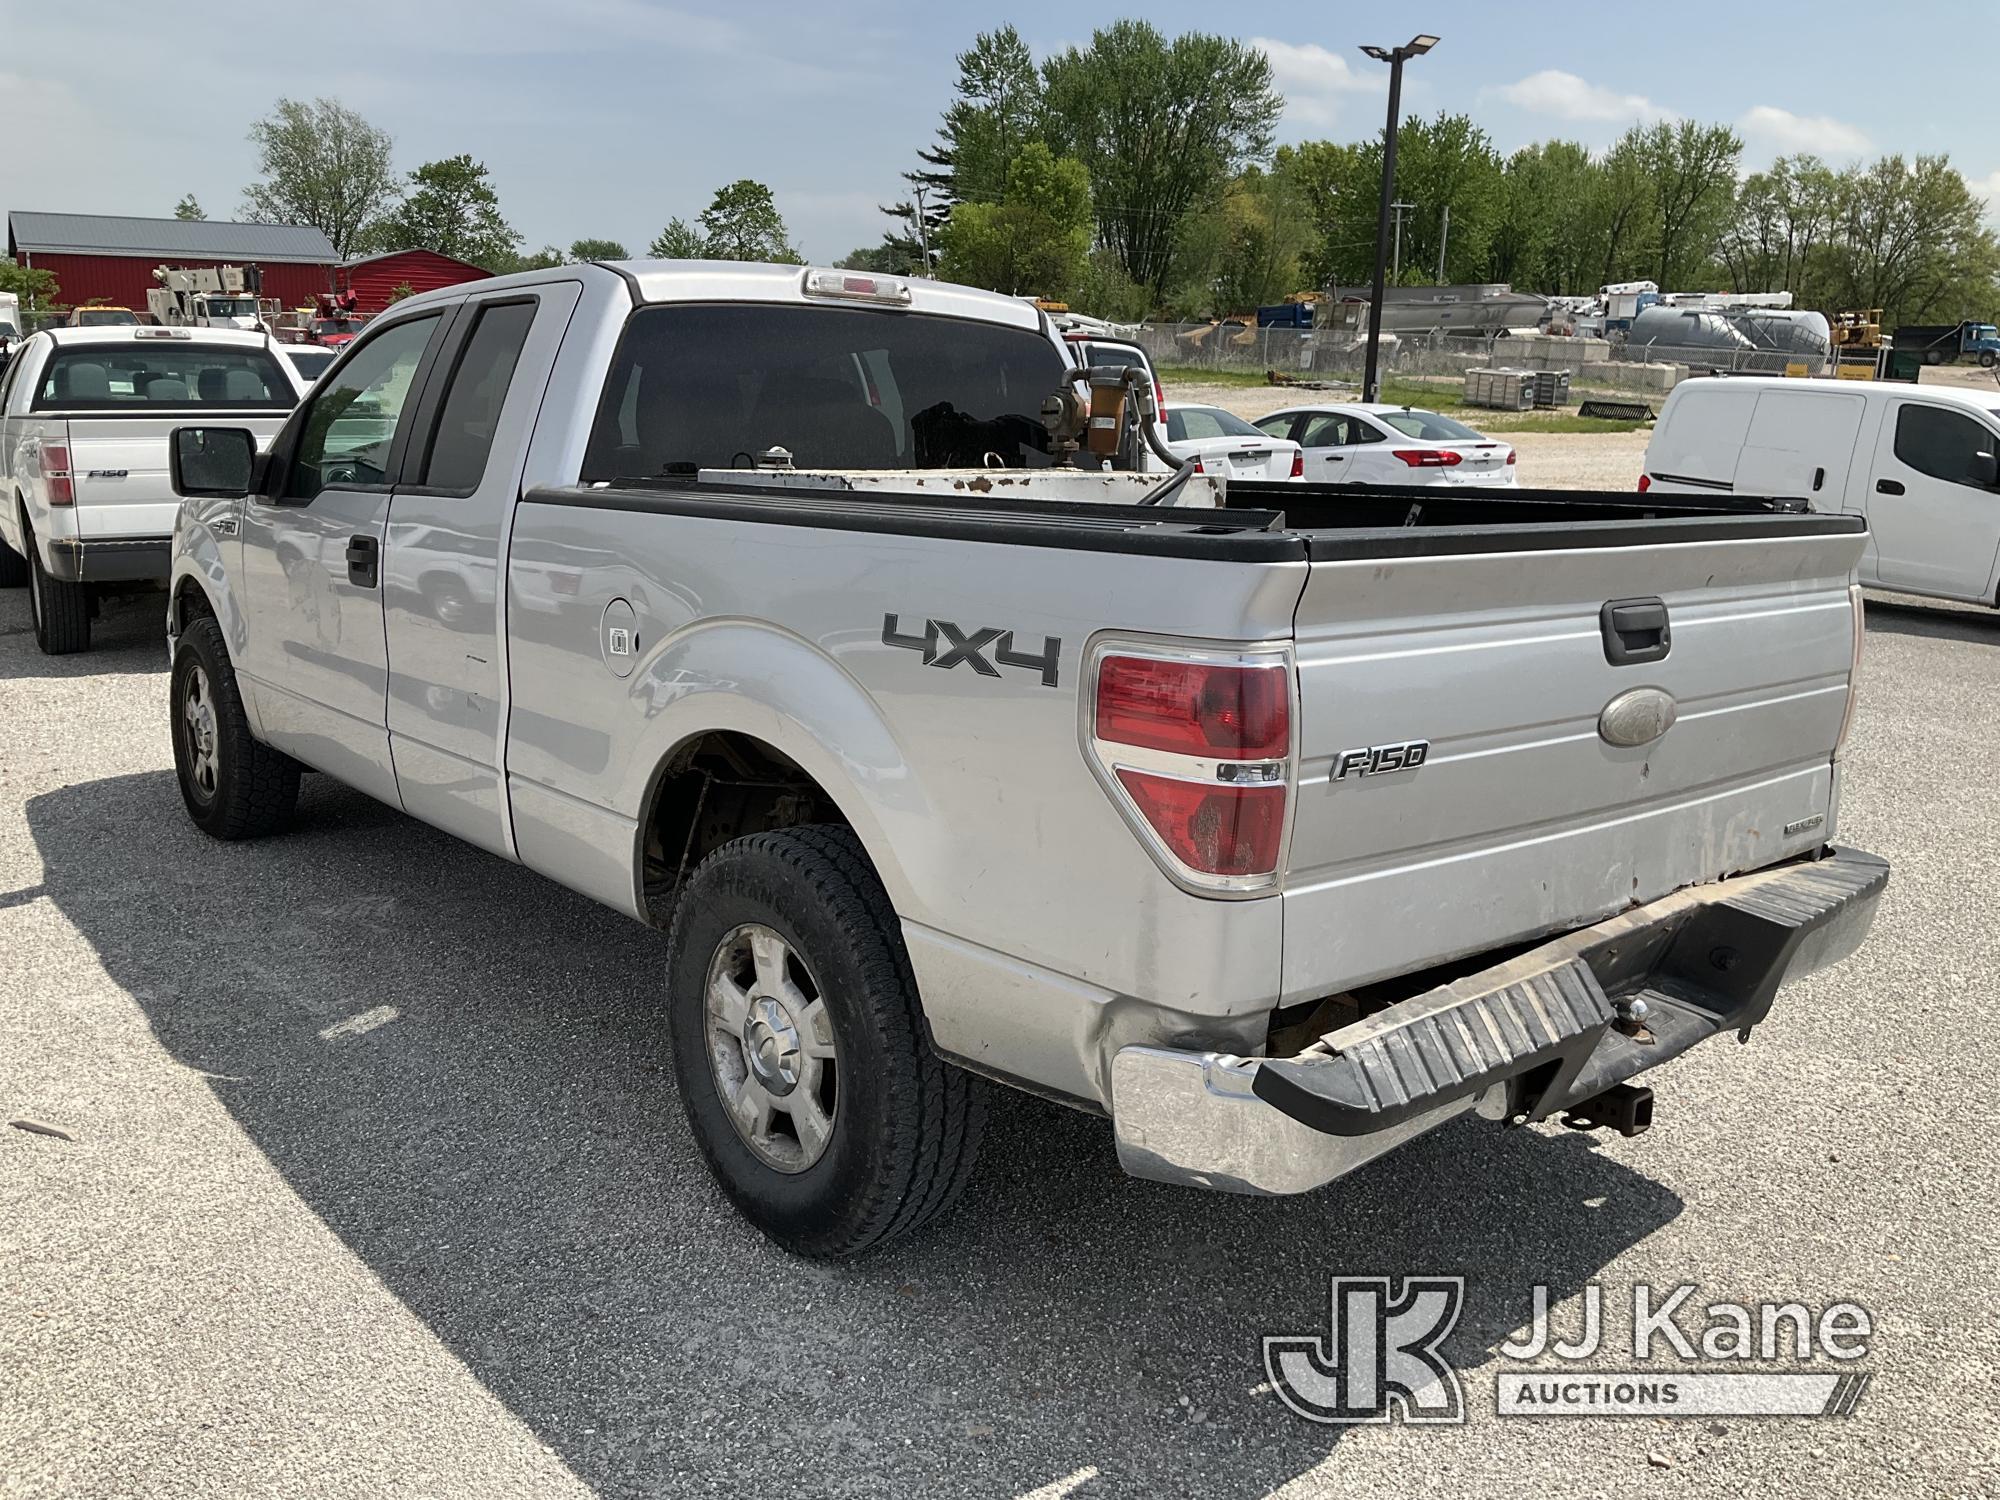 (Hawk Point, MO) 2011 Ford F150 4x4 Extended-Cab Pickup Truck Runs & Moves) (Check Engine Light On,